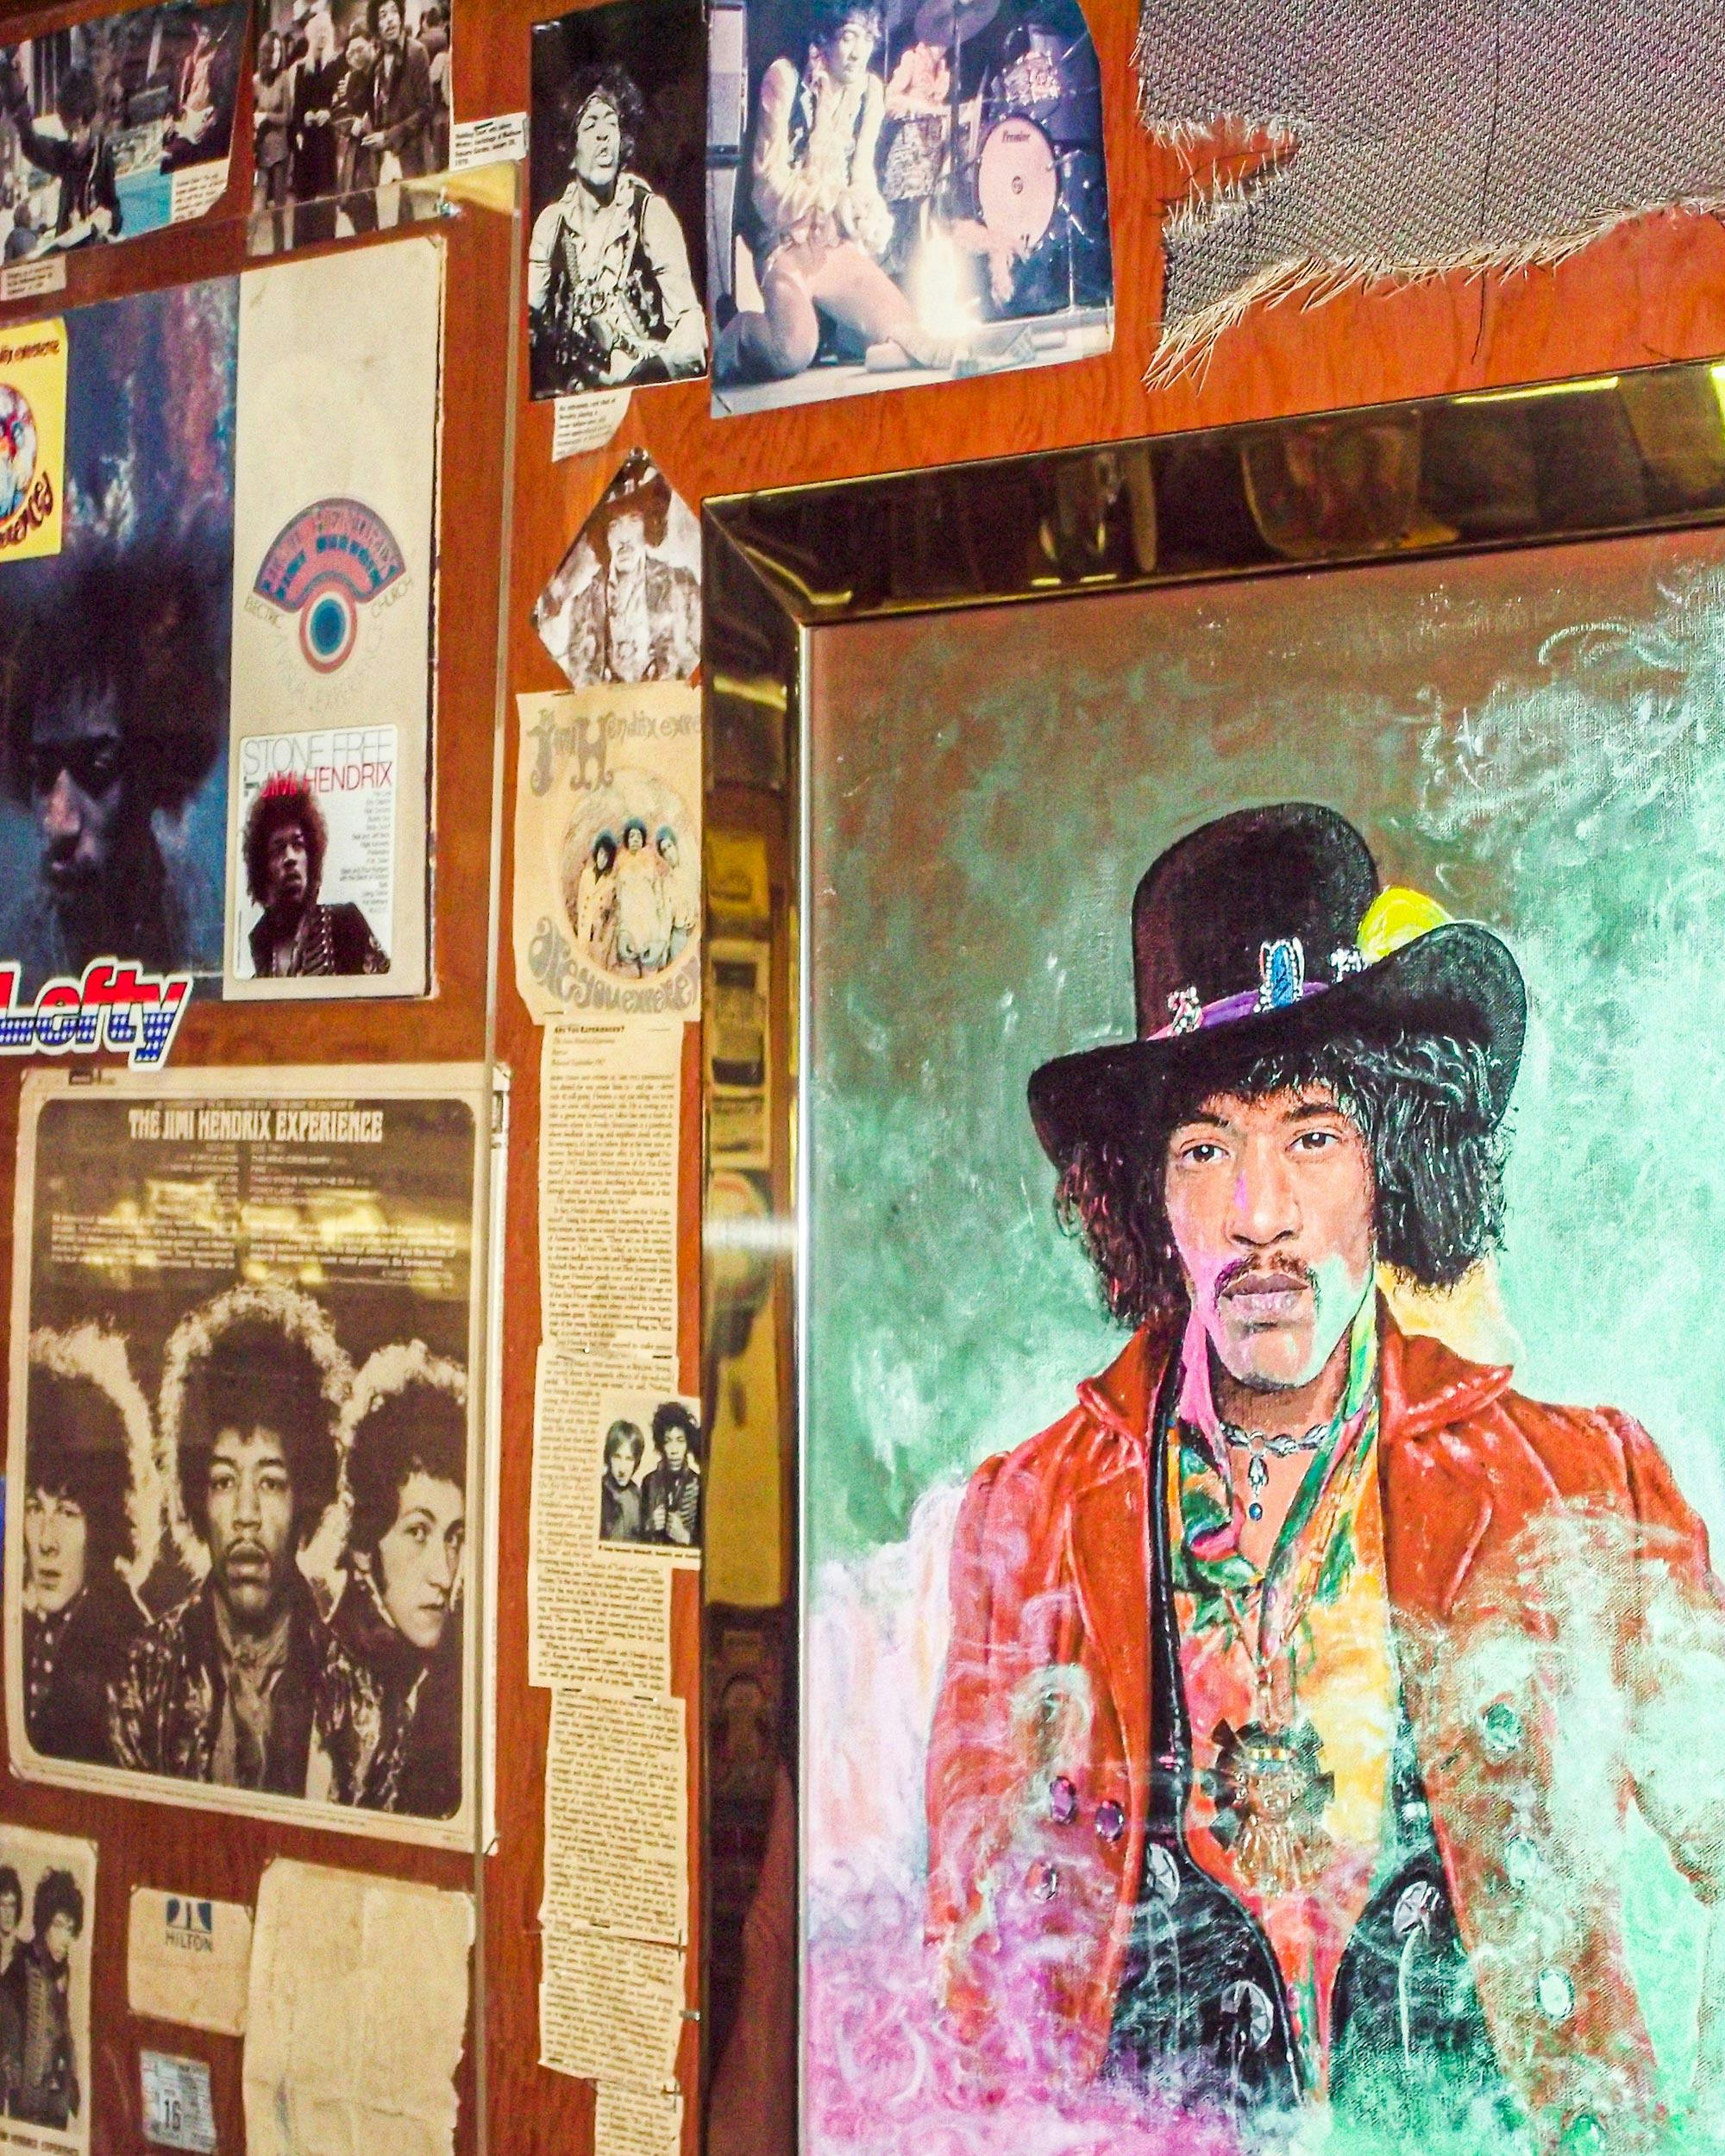 A Jimi Hendrix oil painting by San Marcos artist Michael Giles is surrounded by memorabilia collected by Bobby after meeting Hendrix in 1968 after his first Dallas concert.